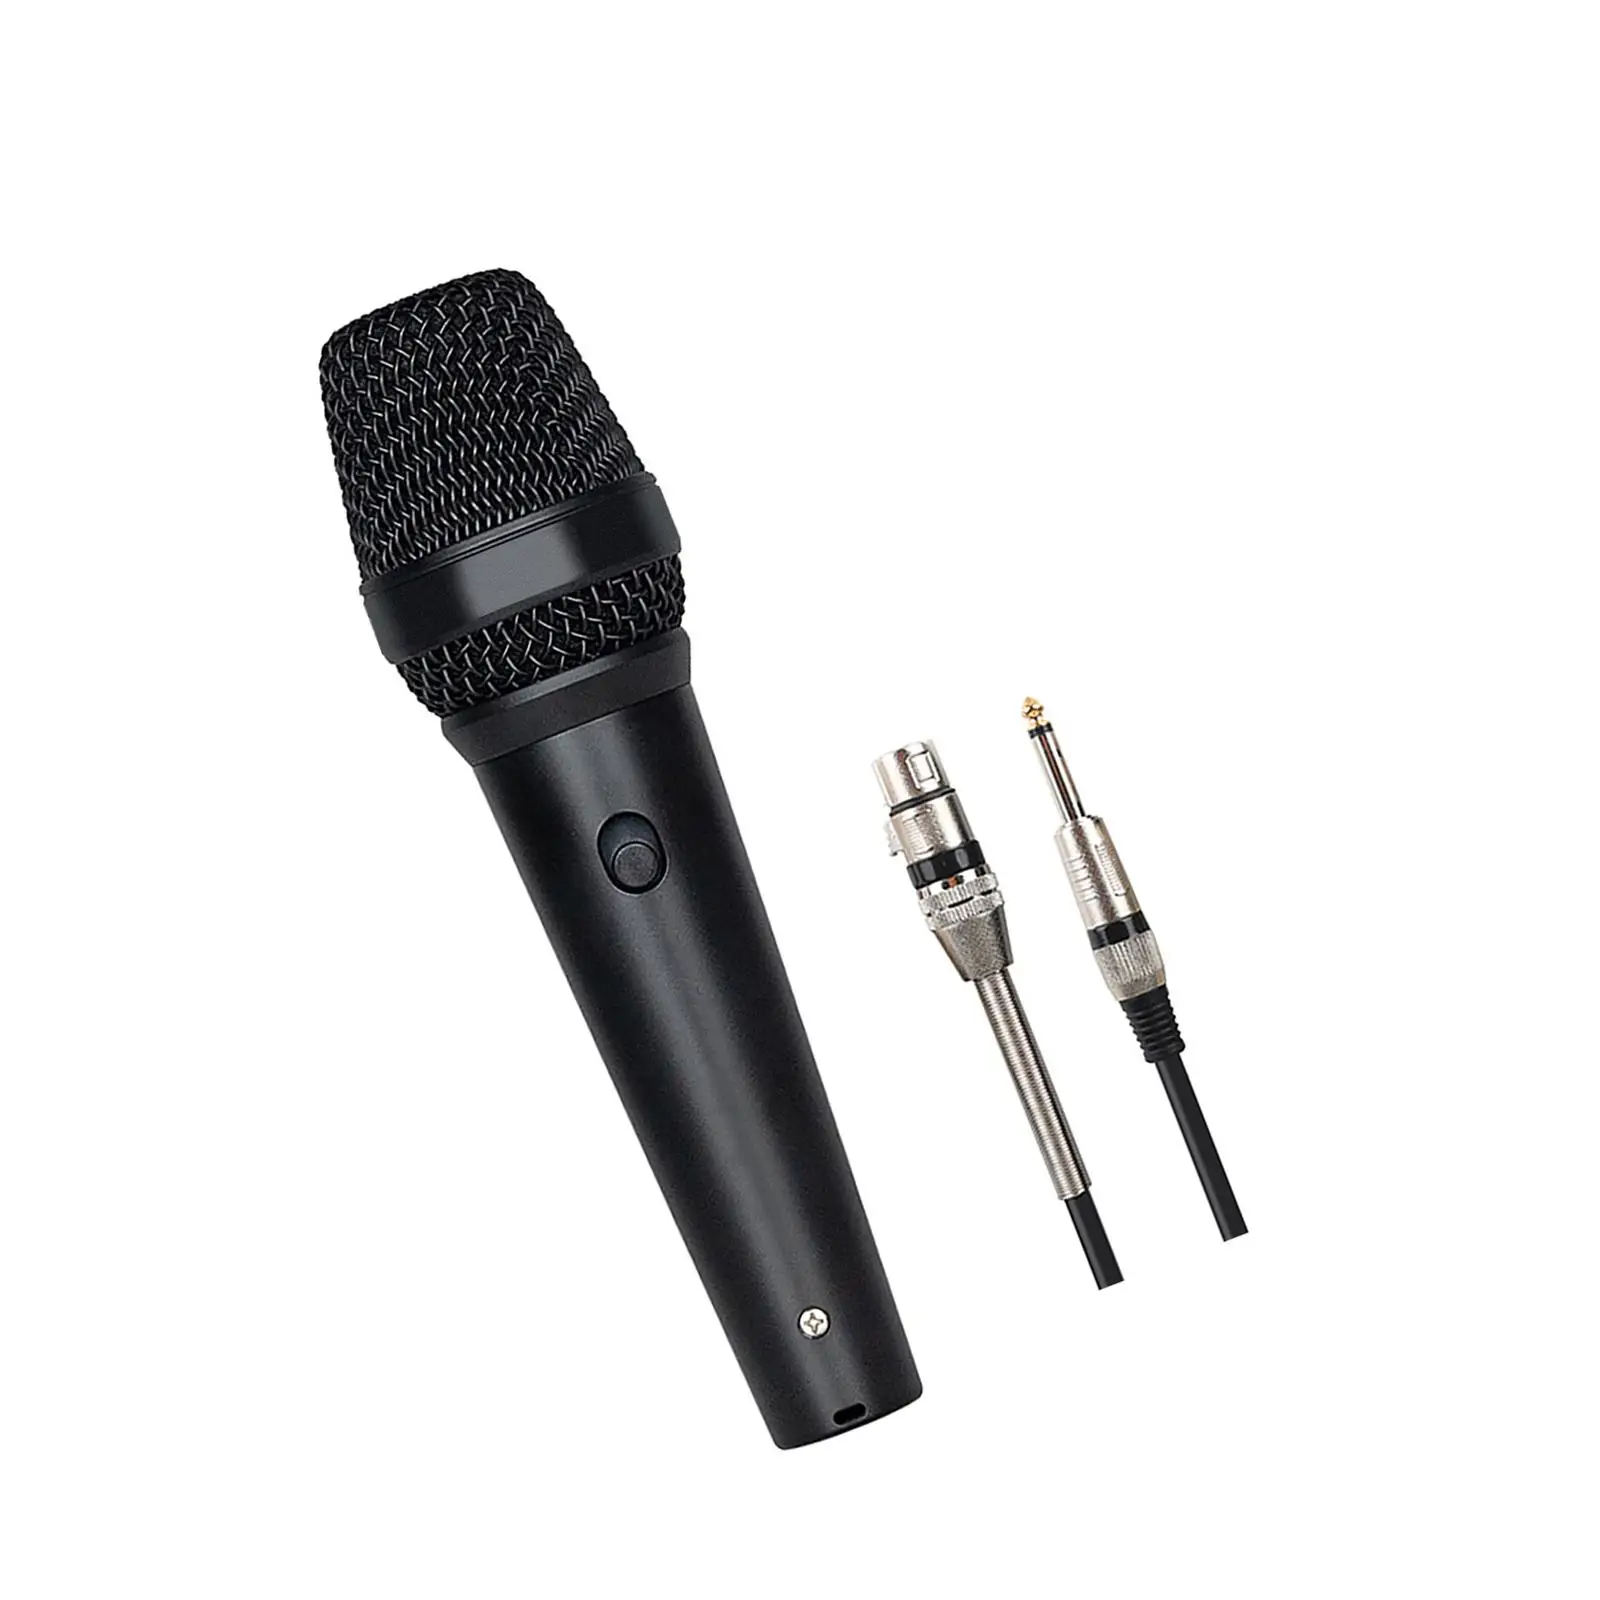 Wired Microphone Cardioid Dynamic Vocal Microphone for Party Home Karaoke